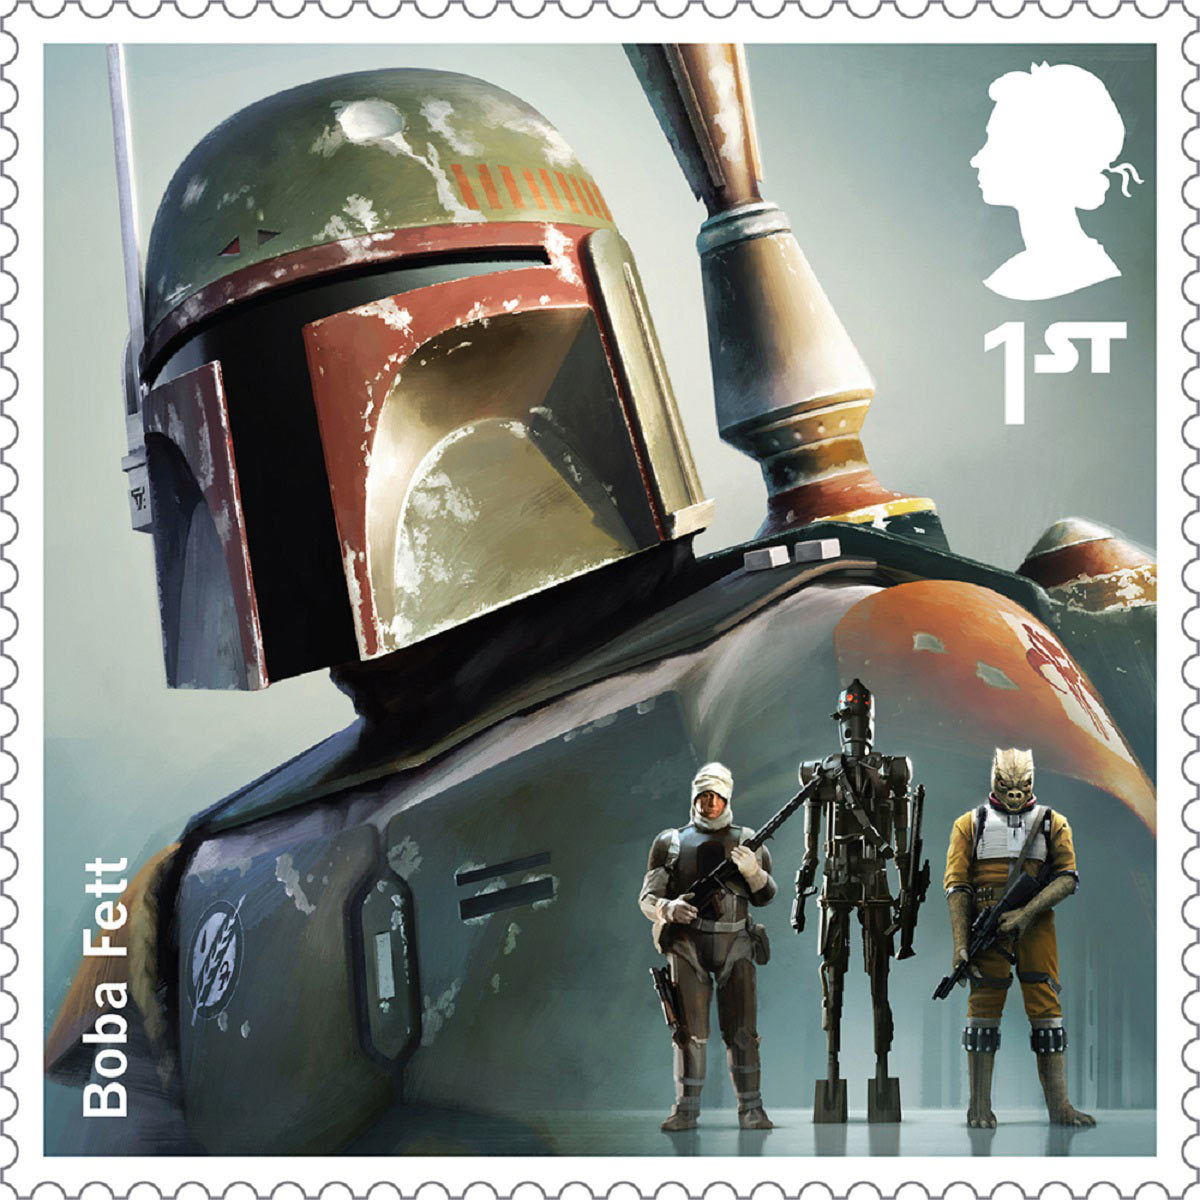 STAR WARS™ Framed Royal Mail® Special Character Collectable Stamps with Tatooine Backdrop